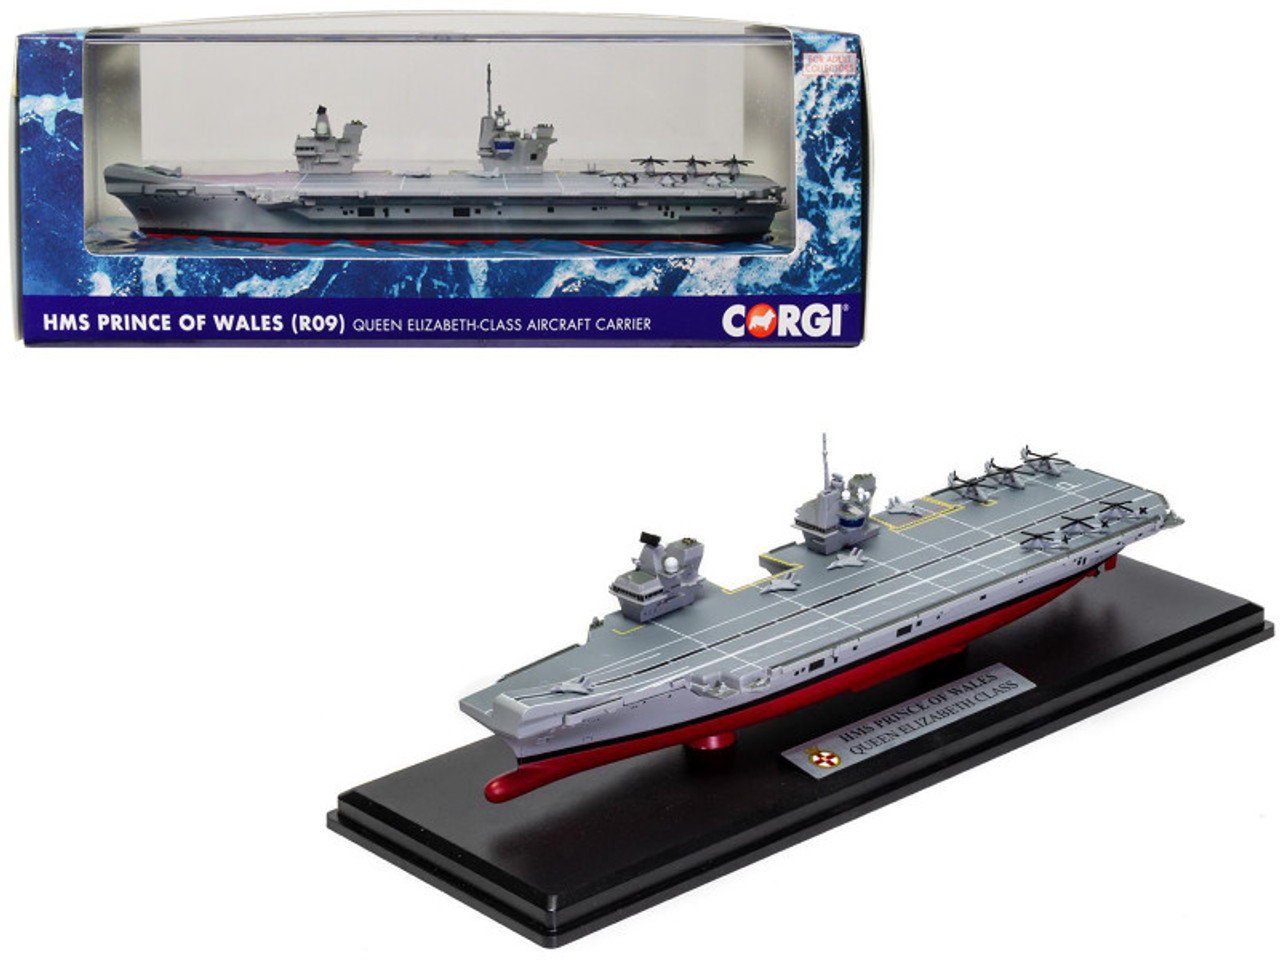 HMS Prince of Wales (R09) Aircraft Carrier "Queen Elizabeth-Class" British Royal Navy "Naval Power" Series 1/1250 Diecast Model by Corgi